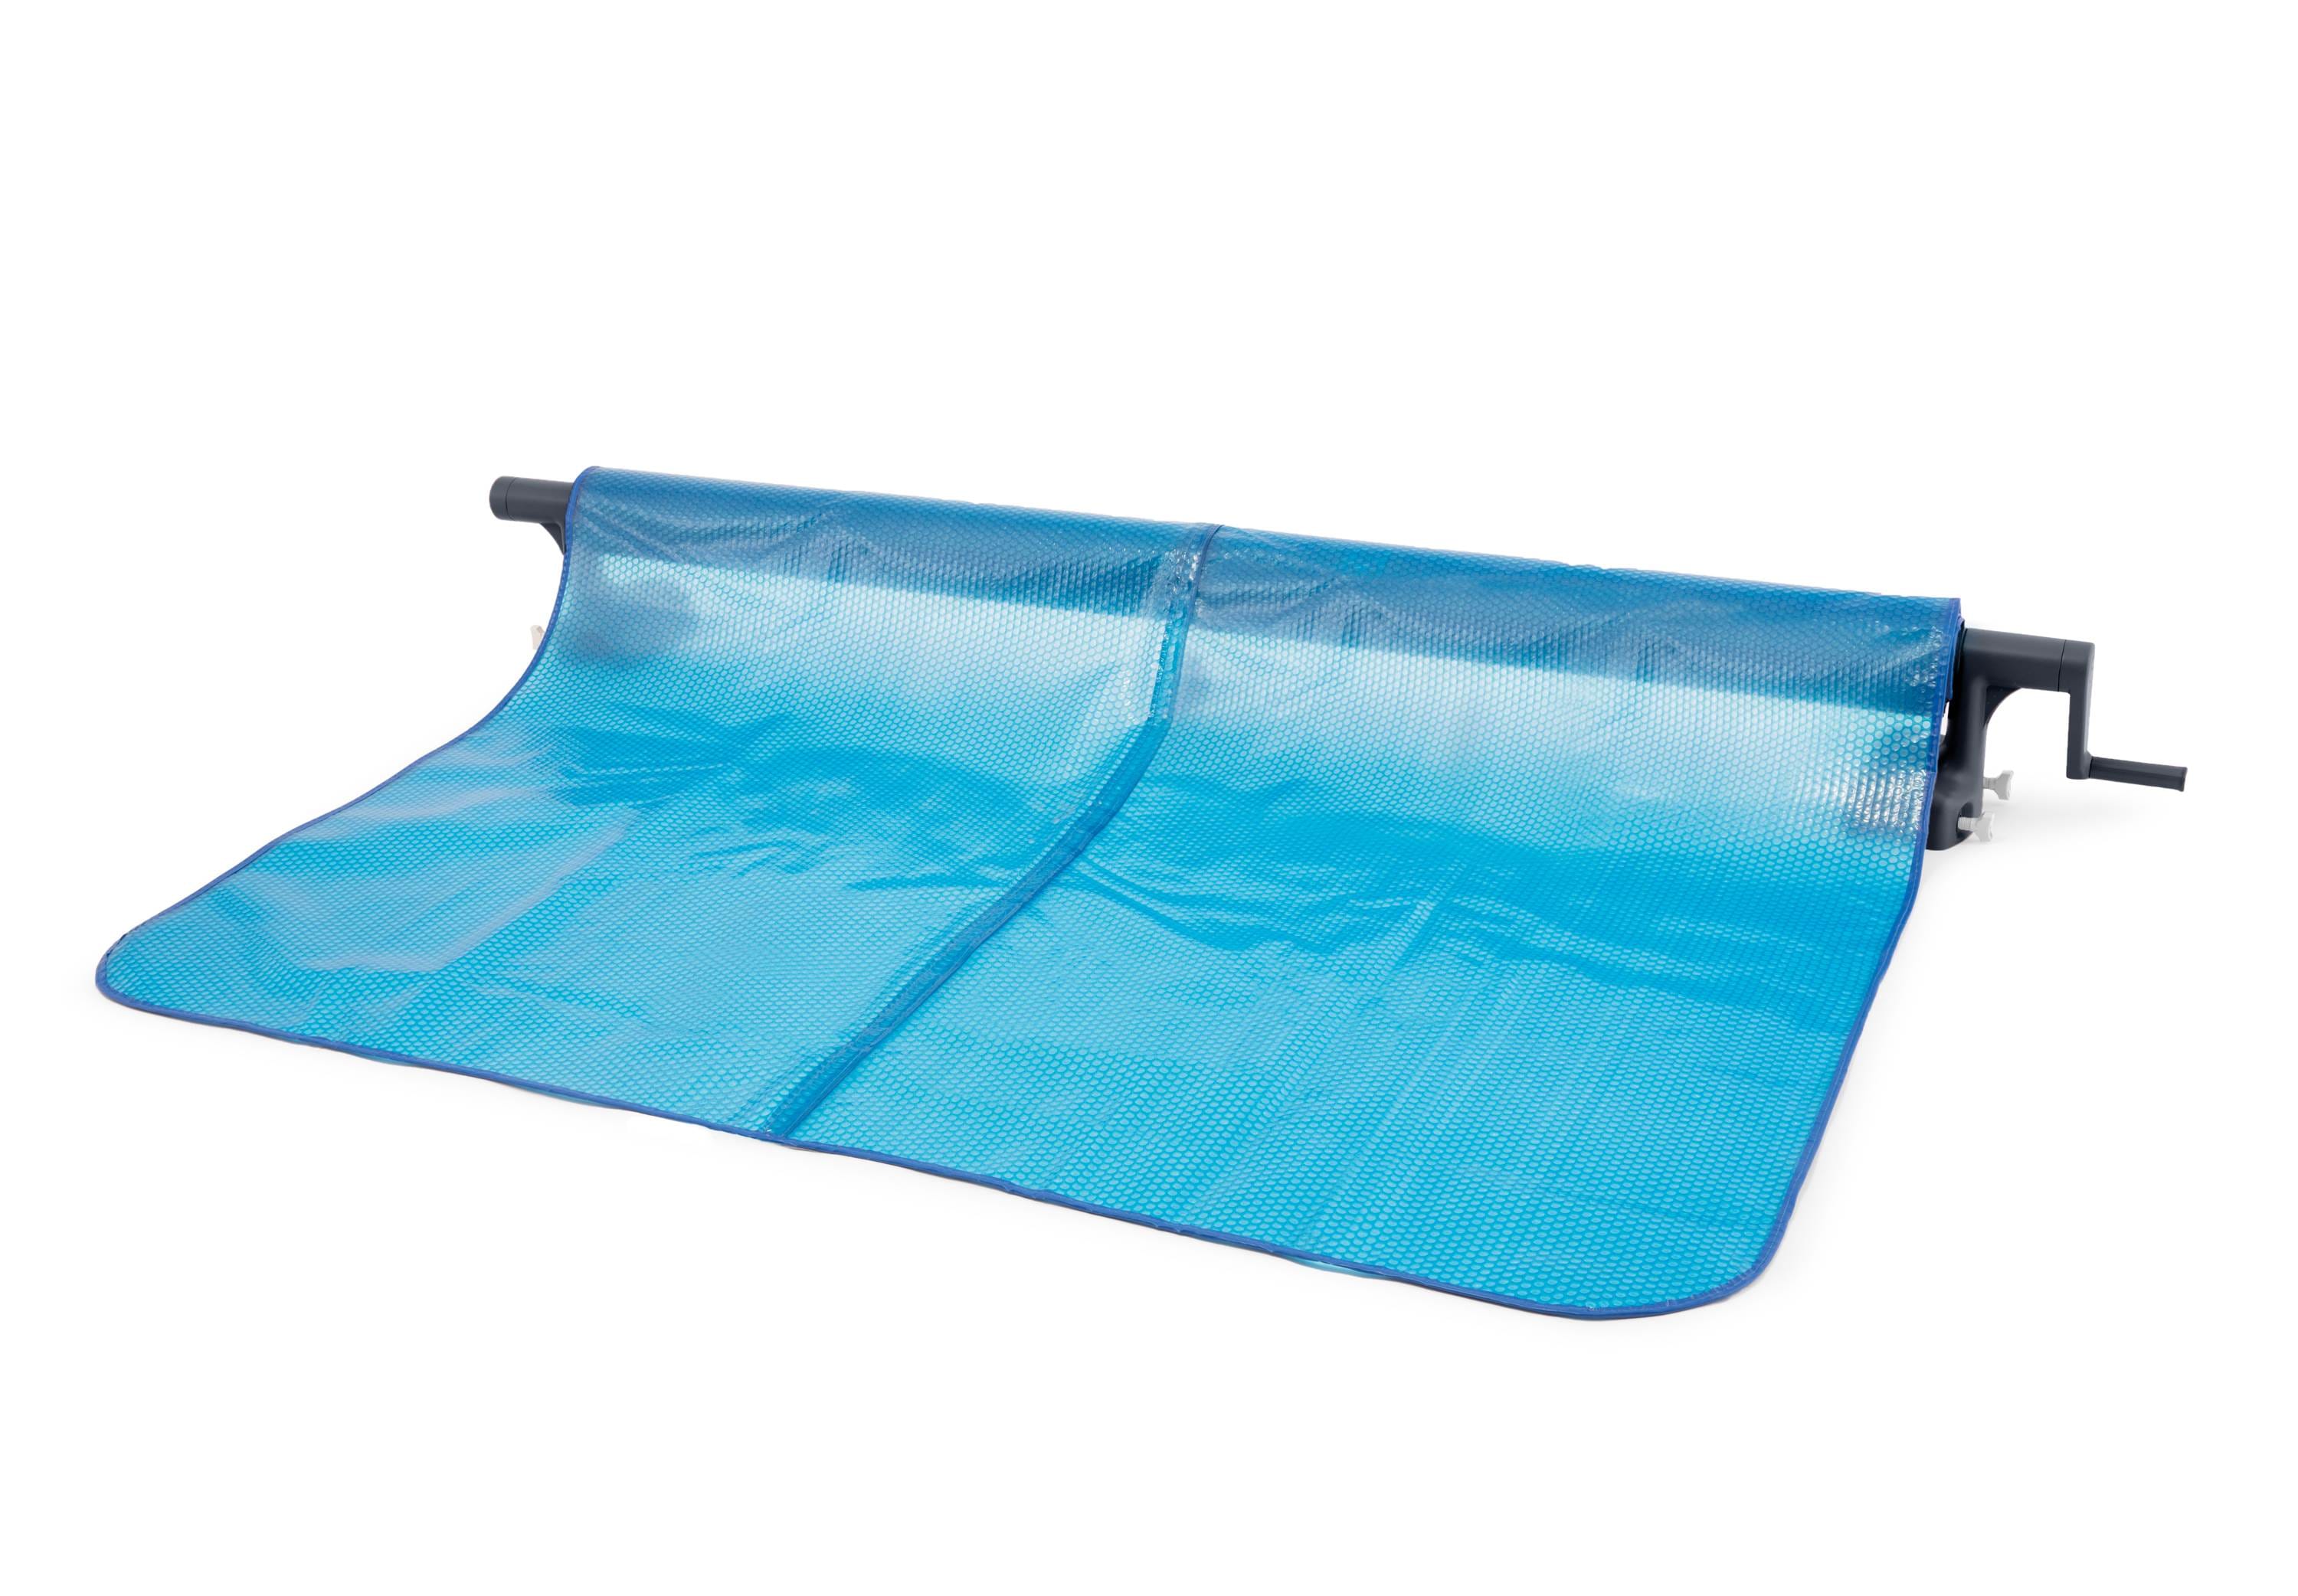 Winado 18-ft Mountable Solar Pool Cover Reel in the Pool Cover